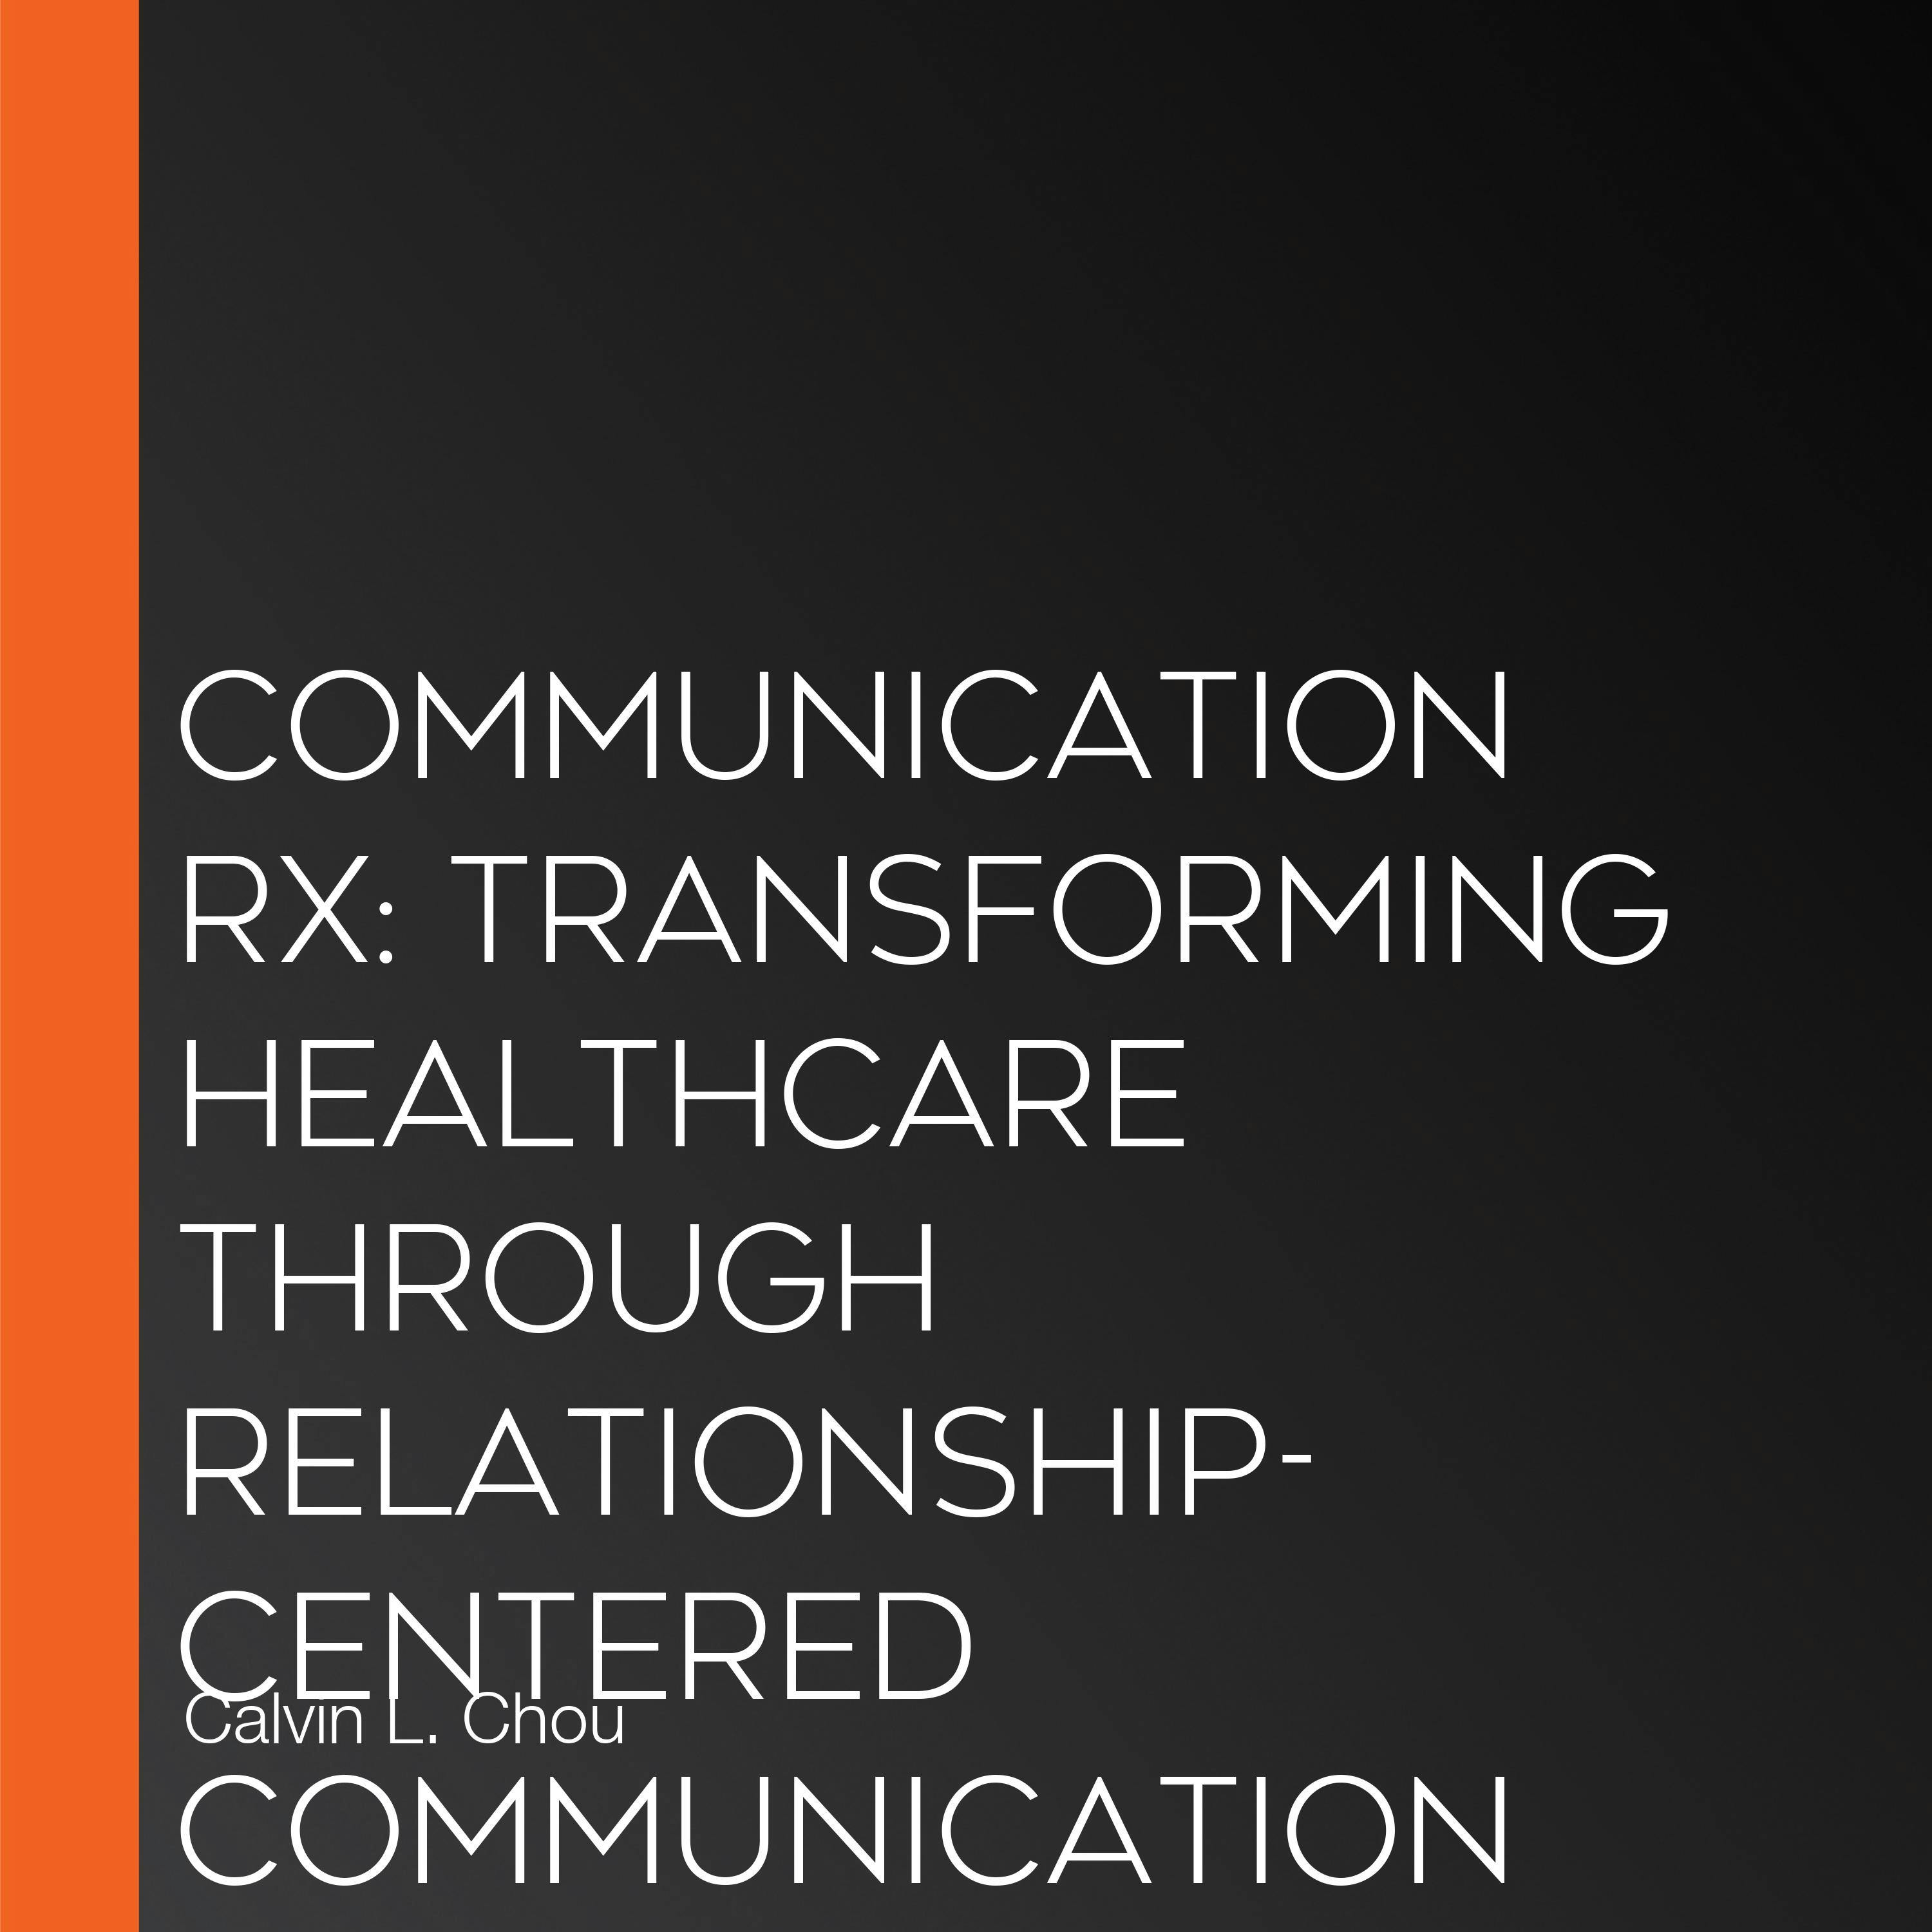 Communication Rx: Transforming Healthcare Through Relationship-Centered Communication - Calvin L. Chou, Laura Cooley